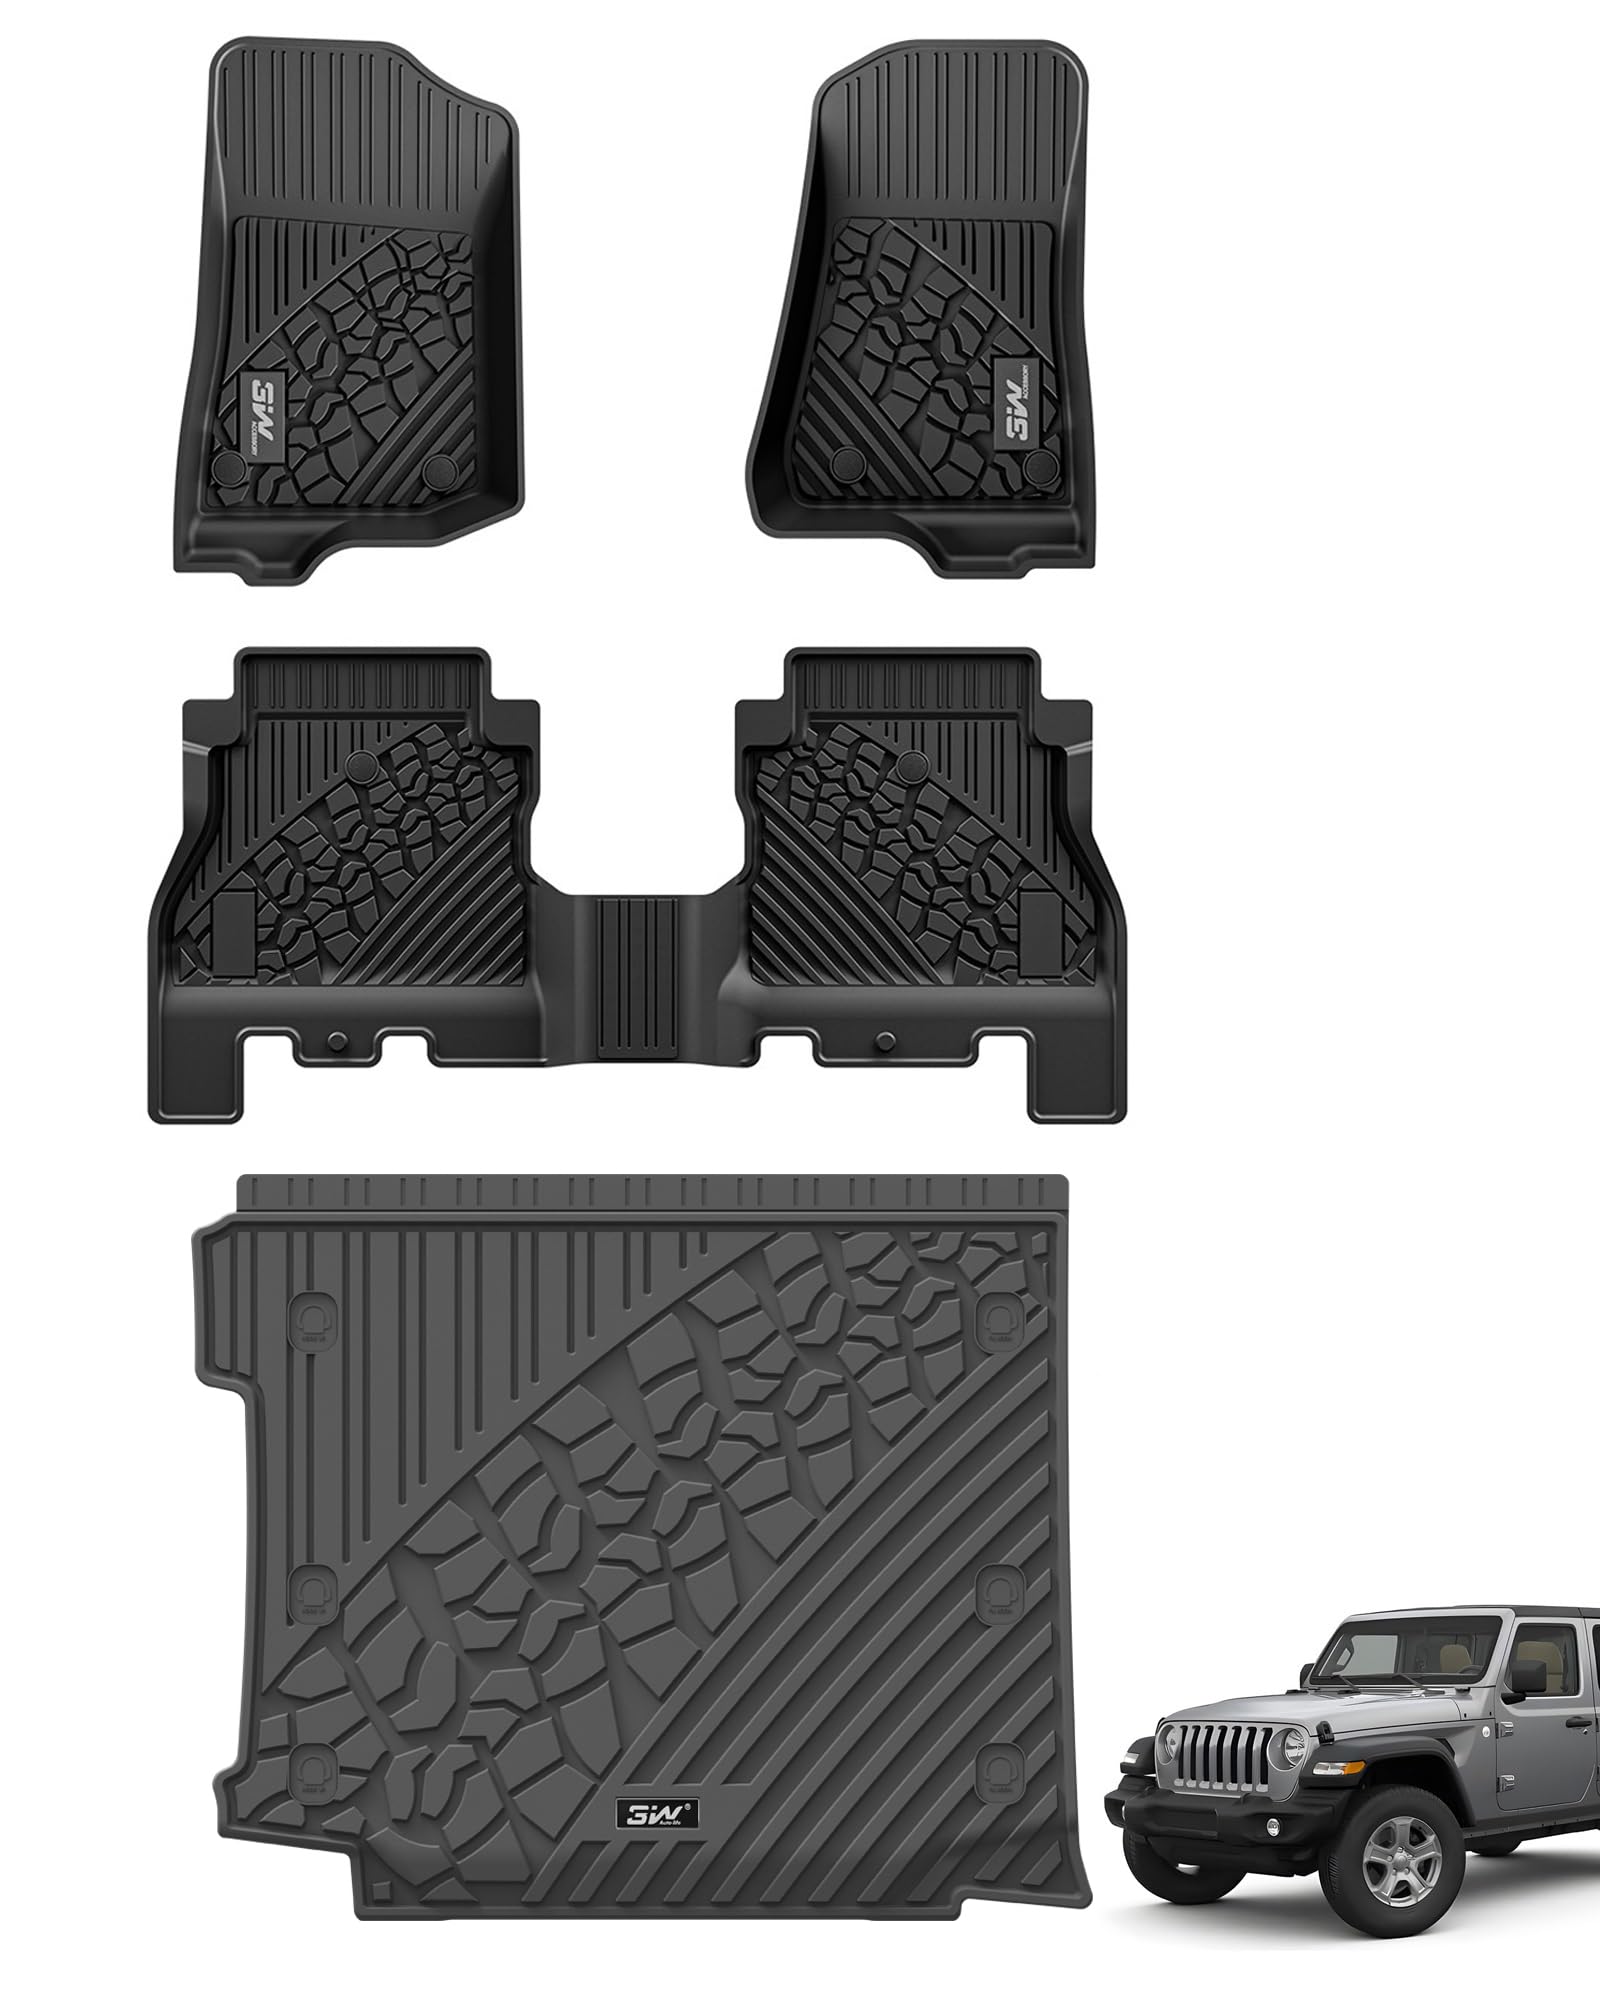 3W Jeep Wrangler JL (Non JK or 4XE) 2018-2023 Custom Floor Mats / Trunk Mat TPE Material & All-Weather Protection Vehicles & Parts 3w 2018-2023 Wrangler JL 2018-2023 with Subwoofer 1st&2nd Row Mats+Trunk Mat